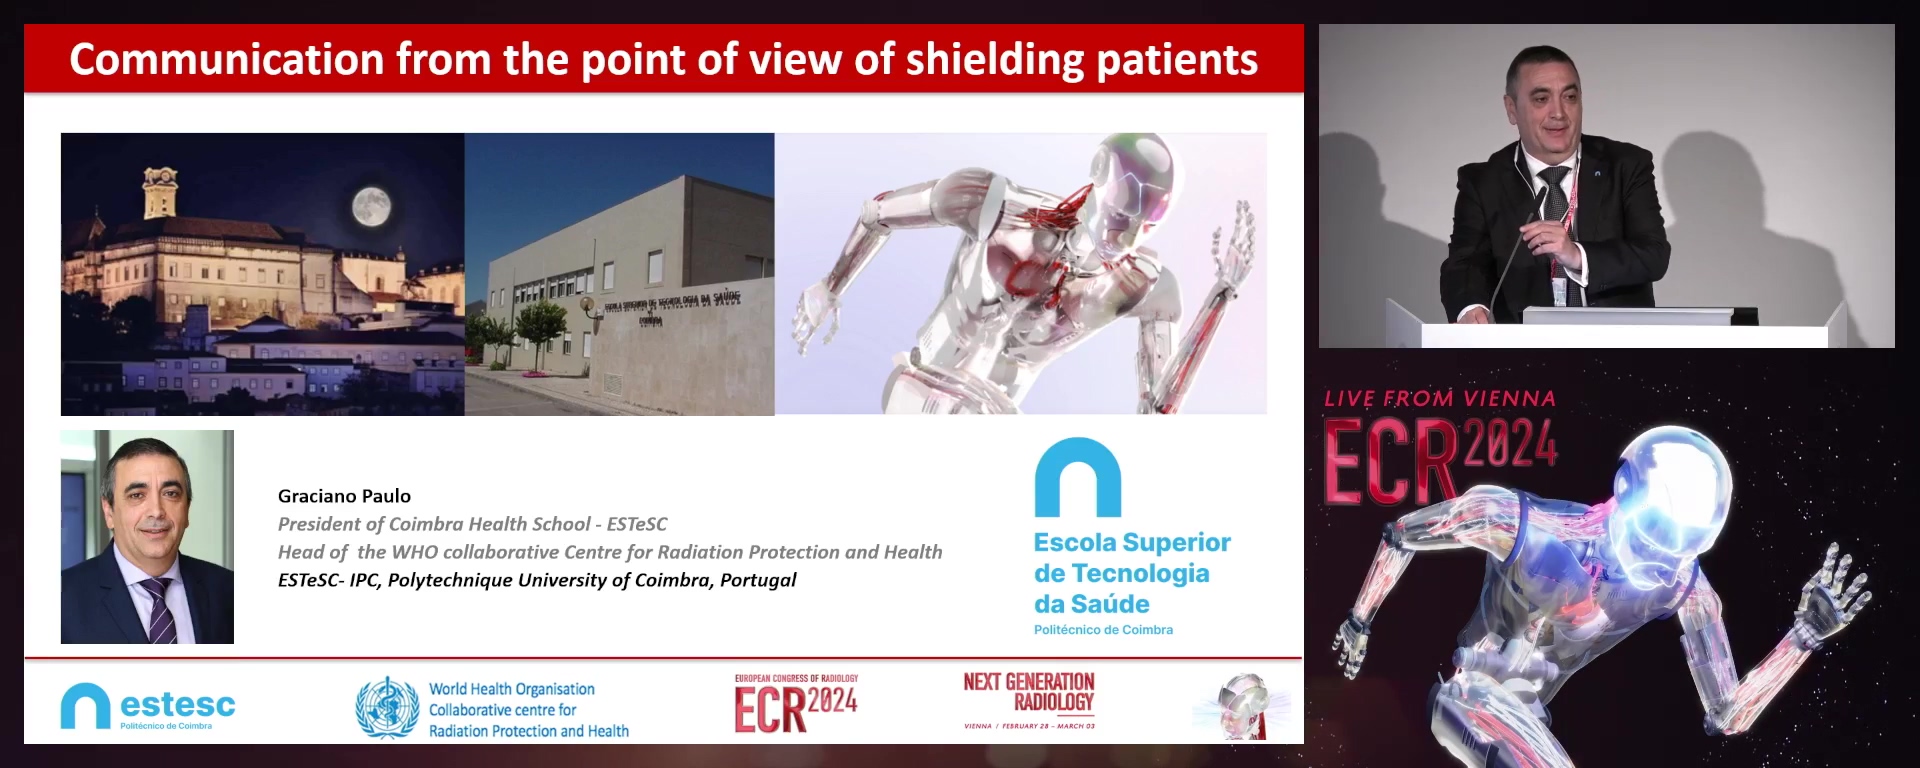 Communication from the point of view of shielding patients